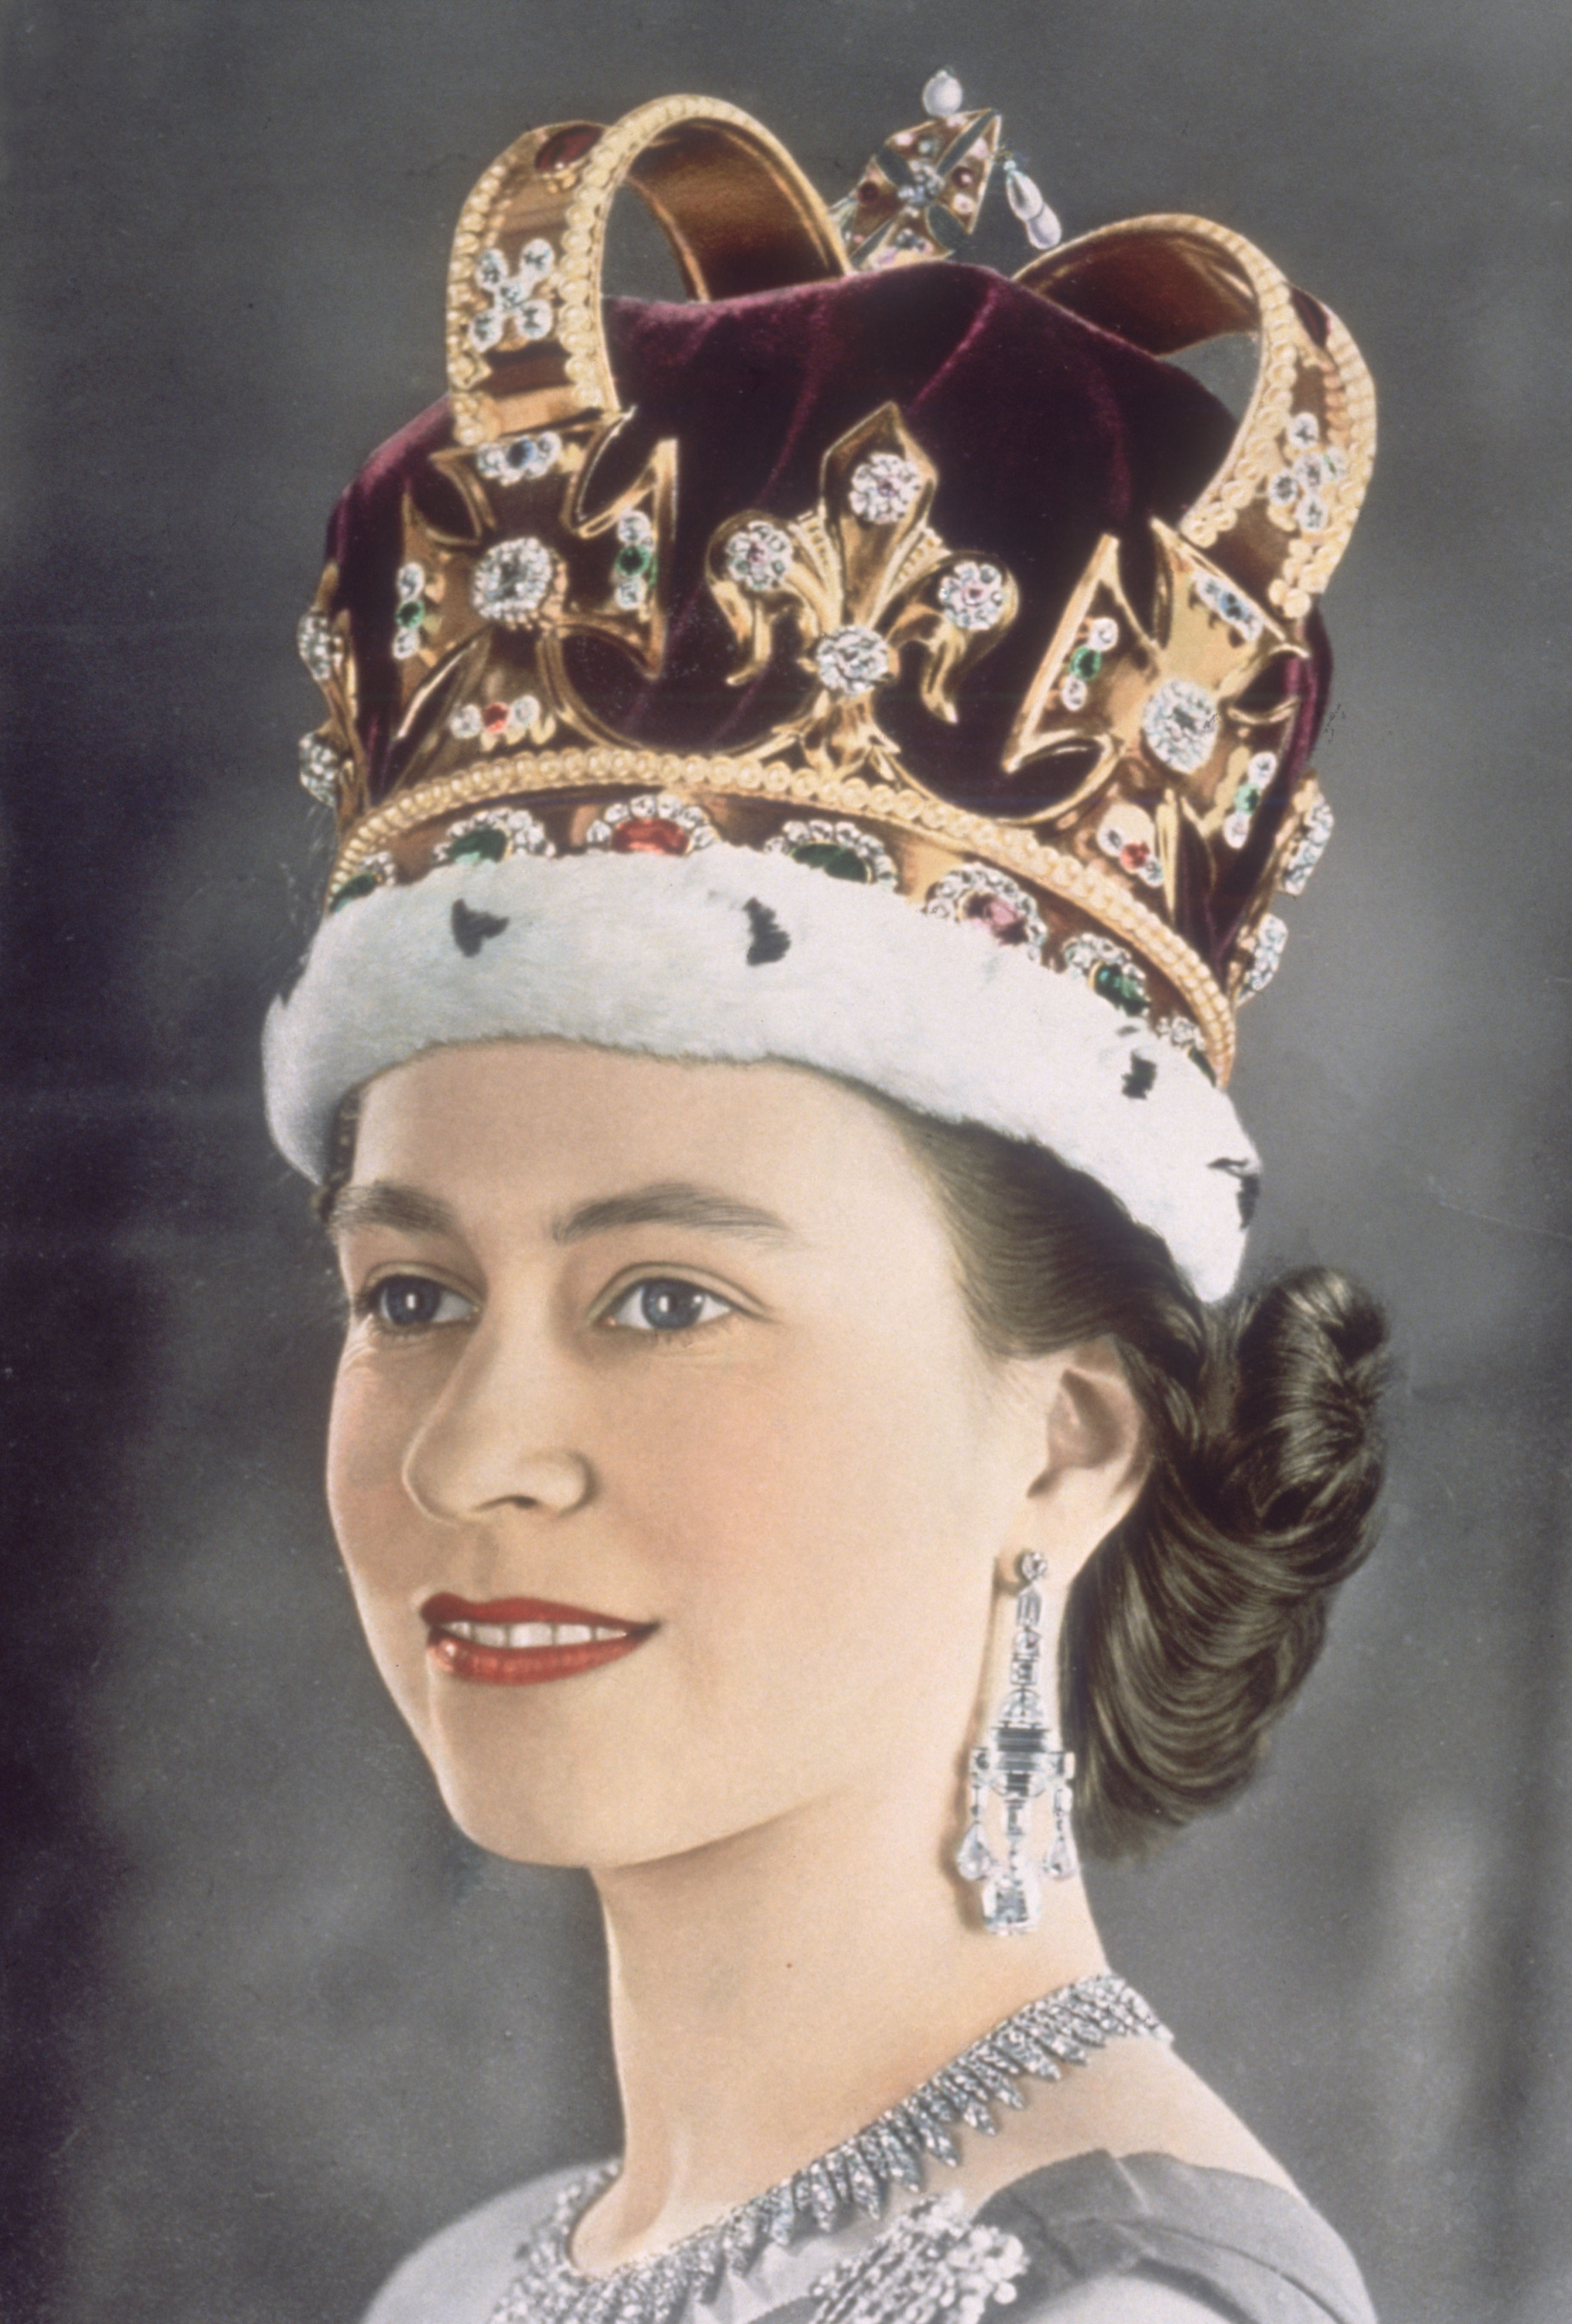 <p>To honor Queen Elizabeth II -- on what would have been her 98th birthday on April 21, 2024 -- and her 70 years of service on Britain's throne following <a href="https://www.wonderwall.com/celebrity/celebrities-dignitaries-react-to-death-of-queen-elizabeth-ii-647756.gallery">her death</a> at Balmoral Castle in Scotland on Sept. 8, 2022, join us as we look back at some of the milestone moments and memorable personal highs and lows in her life... </p><p>In June 1953, Britain's new Queen Elizabeth II posed for a portrait in St. Edward's Crown, which was crafted in 1661 for the coronation of King Charles II and is reputed to contain gold from the crown of Edward the Confessor. It is set with 444 precious stones.</p><p><em>Keep reading to see more milestone moments from the monarch's long life... </em></p><p>MORE: <a href="https://www.msn.com/en-us/community/channel/vid-kwt2e0544658wubk9hsb0rpvnfkttmu3tuj7uq3i4wuywgbakeva?item=flights%3Aprg-tipsubsc-v1a&ocid=social-peregrine&cvid=333aa5de5a654aa7a98a6930005e8f60&ei=2" rel="noreferrer noopener">Follow Wonderwall on MSN for more fun celebrity & entertainment photo galleries and content</a></p>